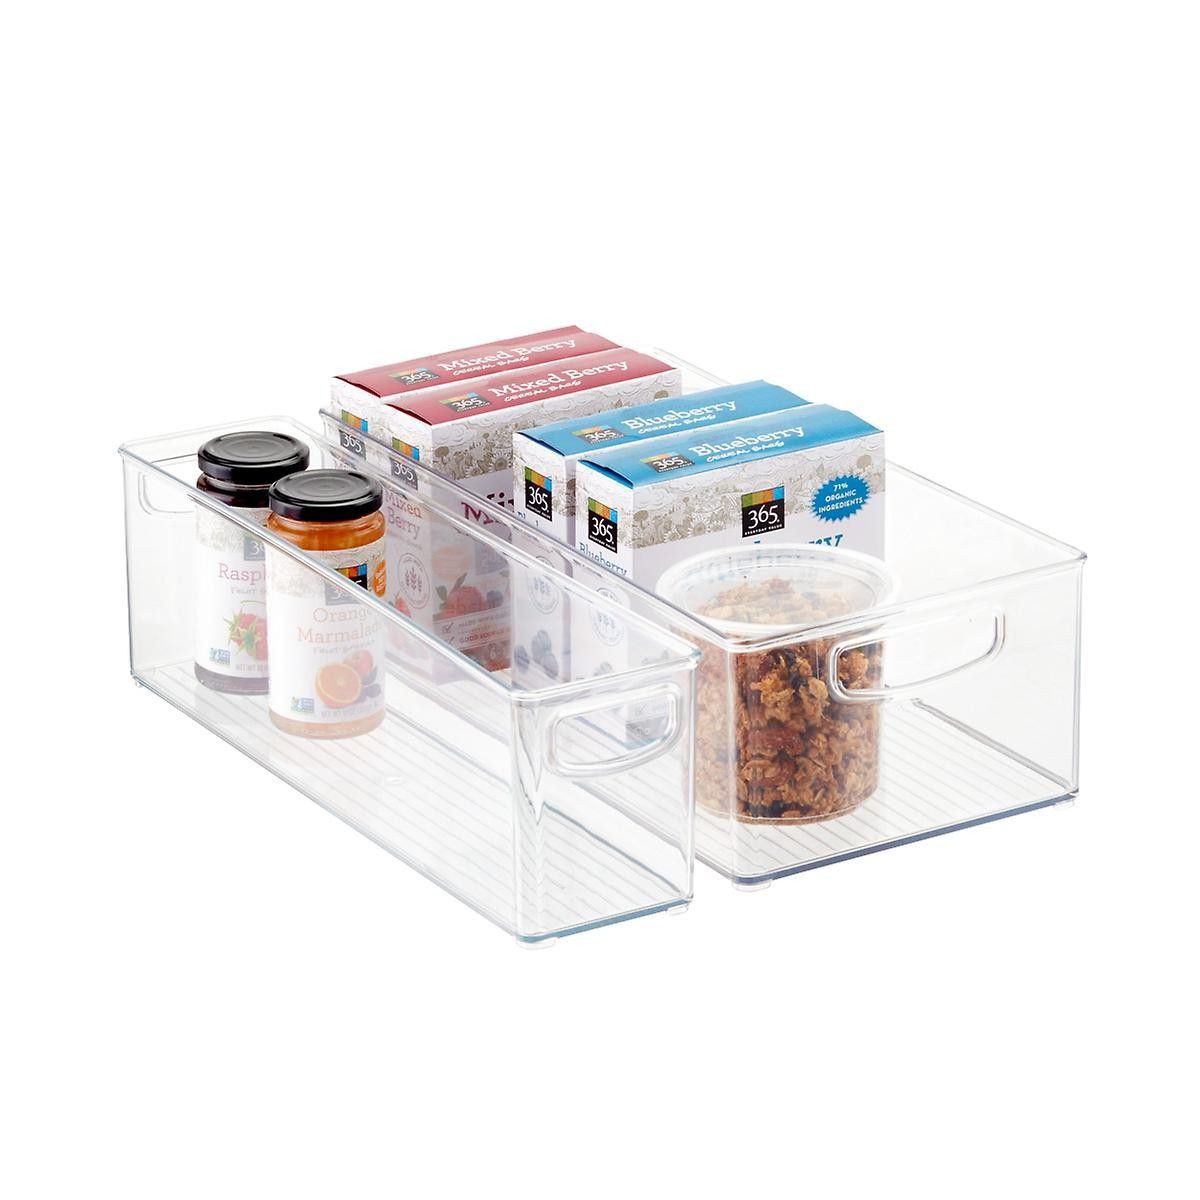 IDESIGN Linus Medium Deep Drawer Bin Clear | The Container Store